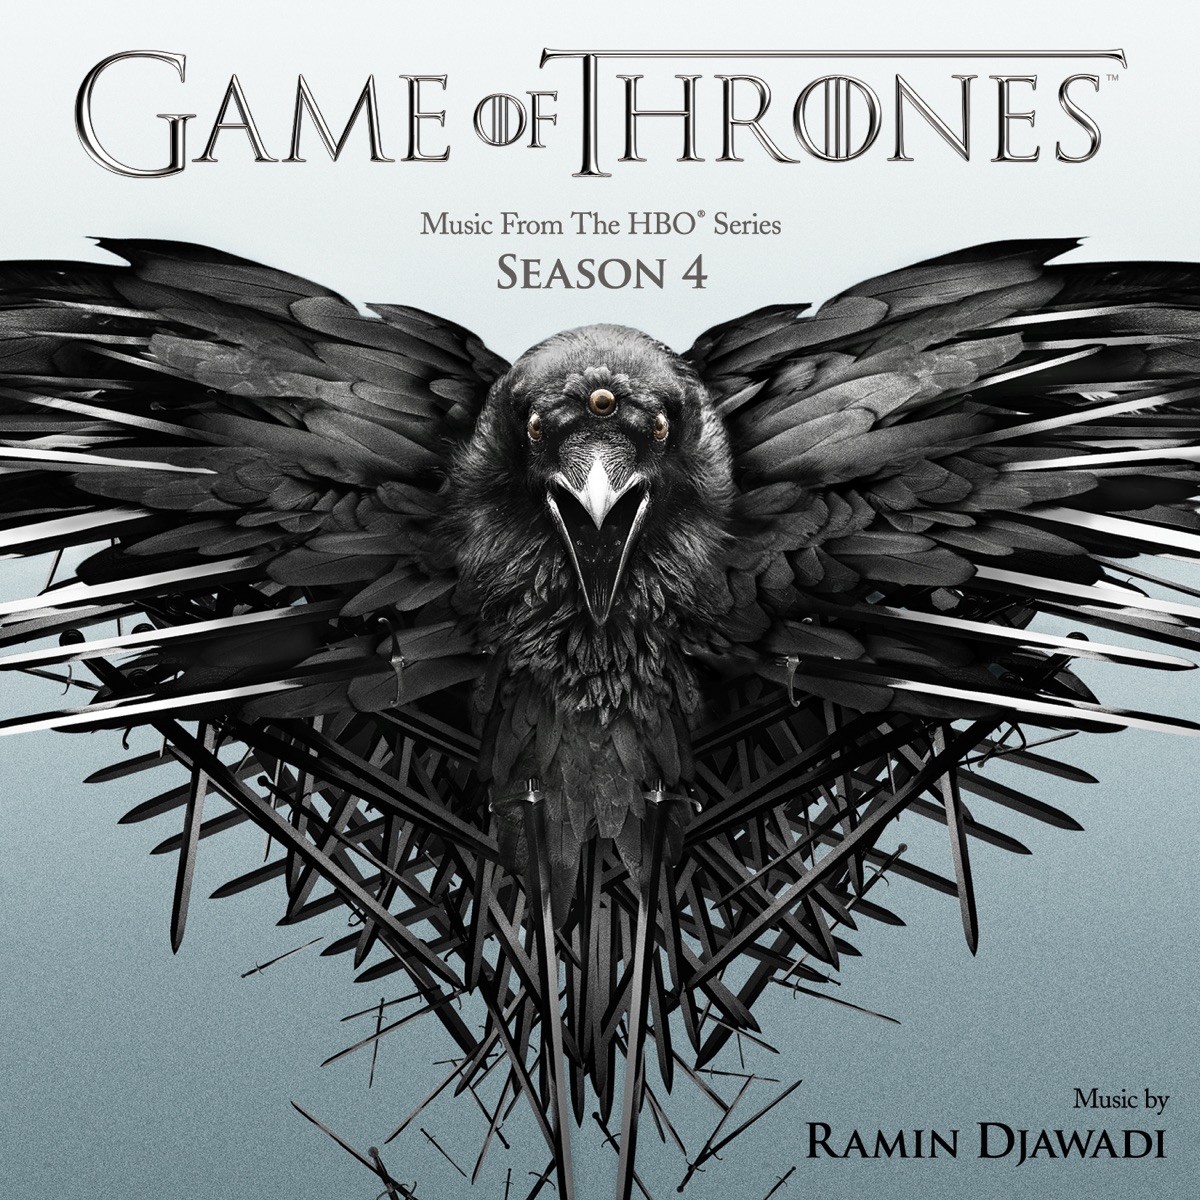 Game of Thrones: Season 8 (Music from the HBO Series) by Ramin Djawadi on  Apple Music